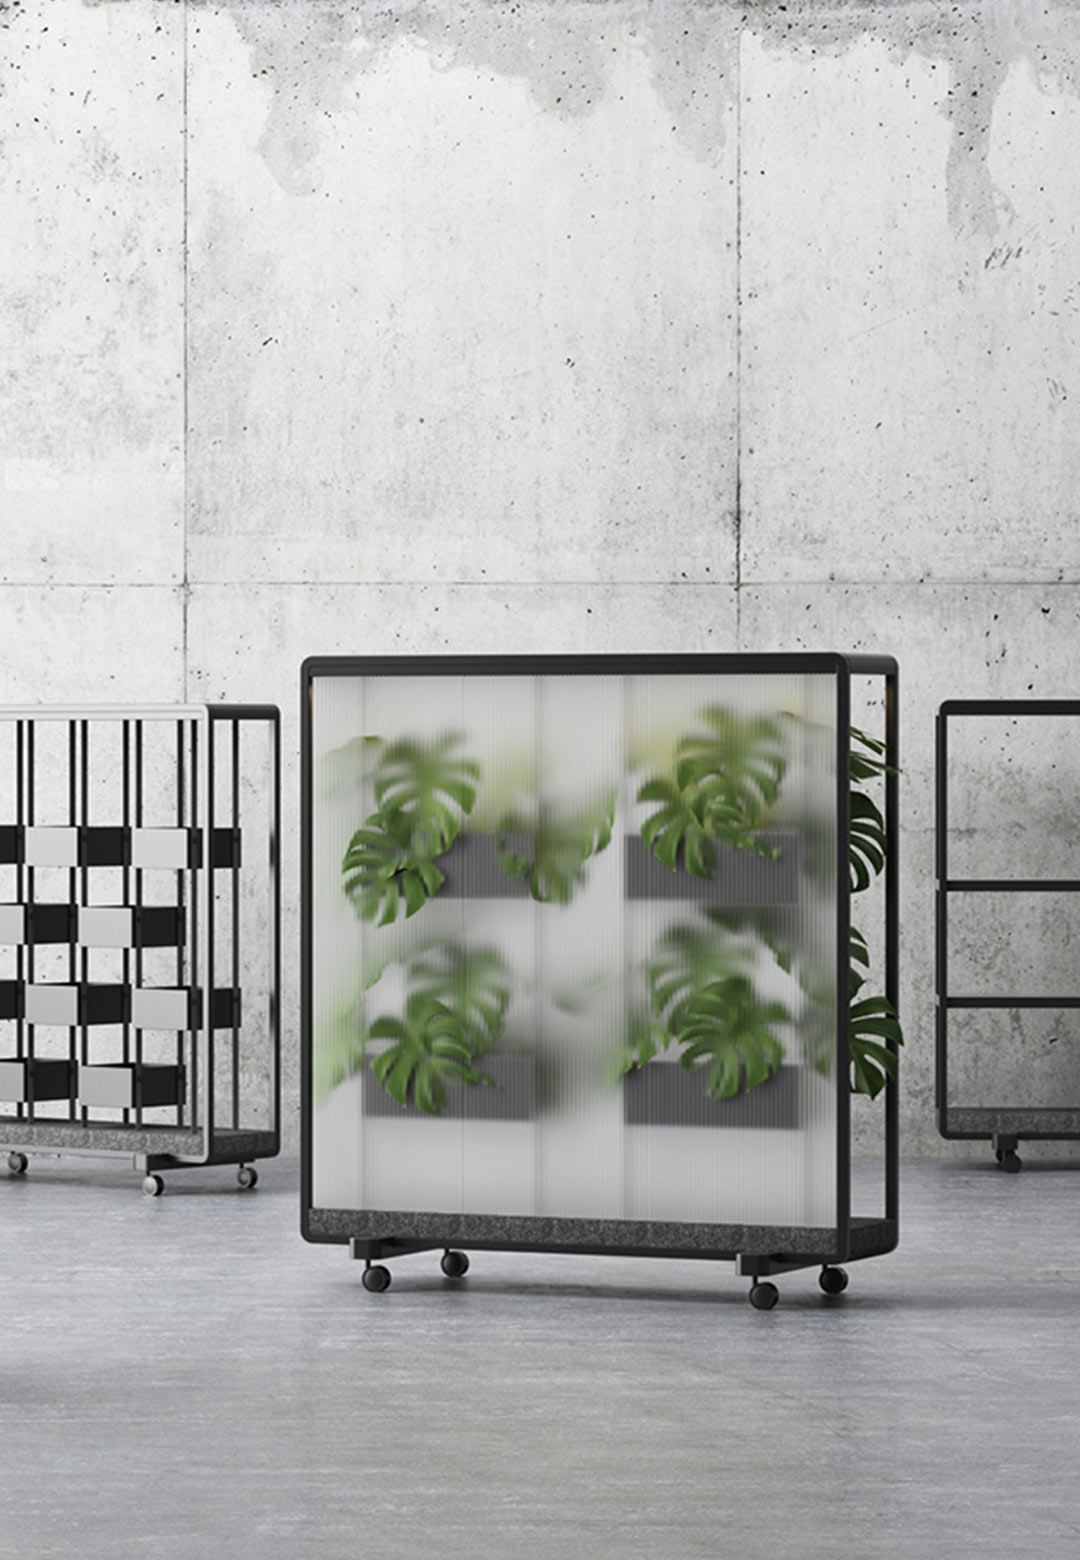 The ‘Hazy’ collection by Studio TZEN redefines sustainable furniture for offices